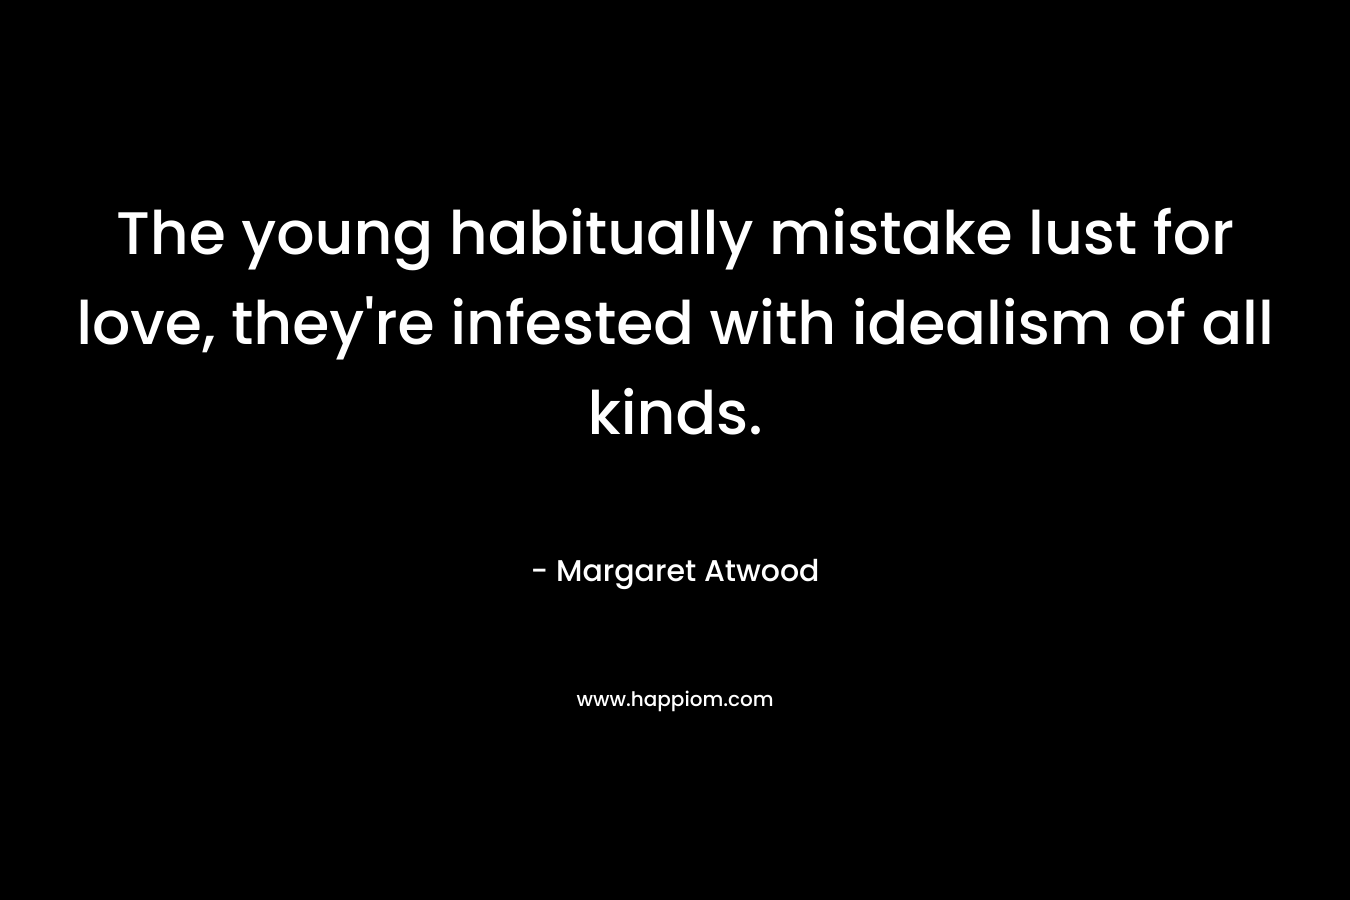 The young habitually mistake lust for love, they’re infested with idealism of all kinds. – Margaret Atwood